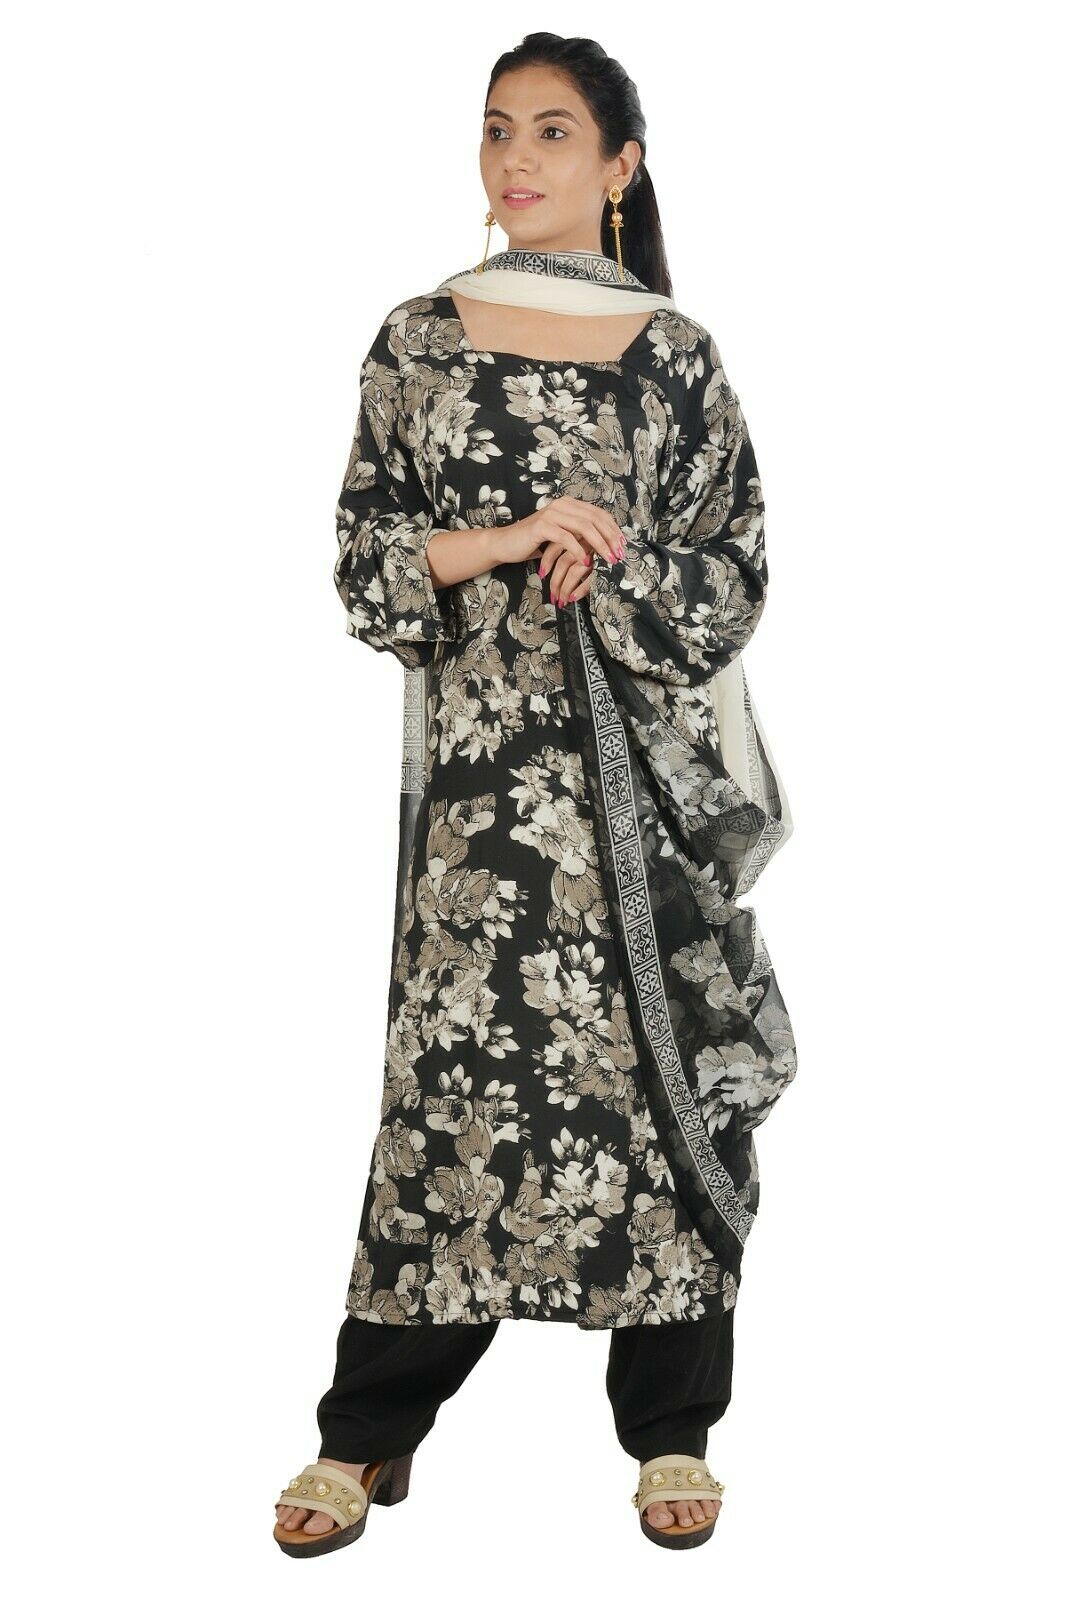 Black Crepe Floral Print Salwar Kameez plus size 48 Fast shipping within 6 day